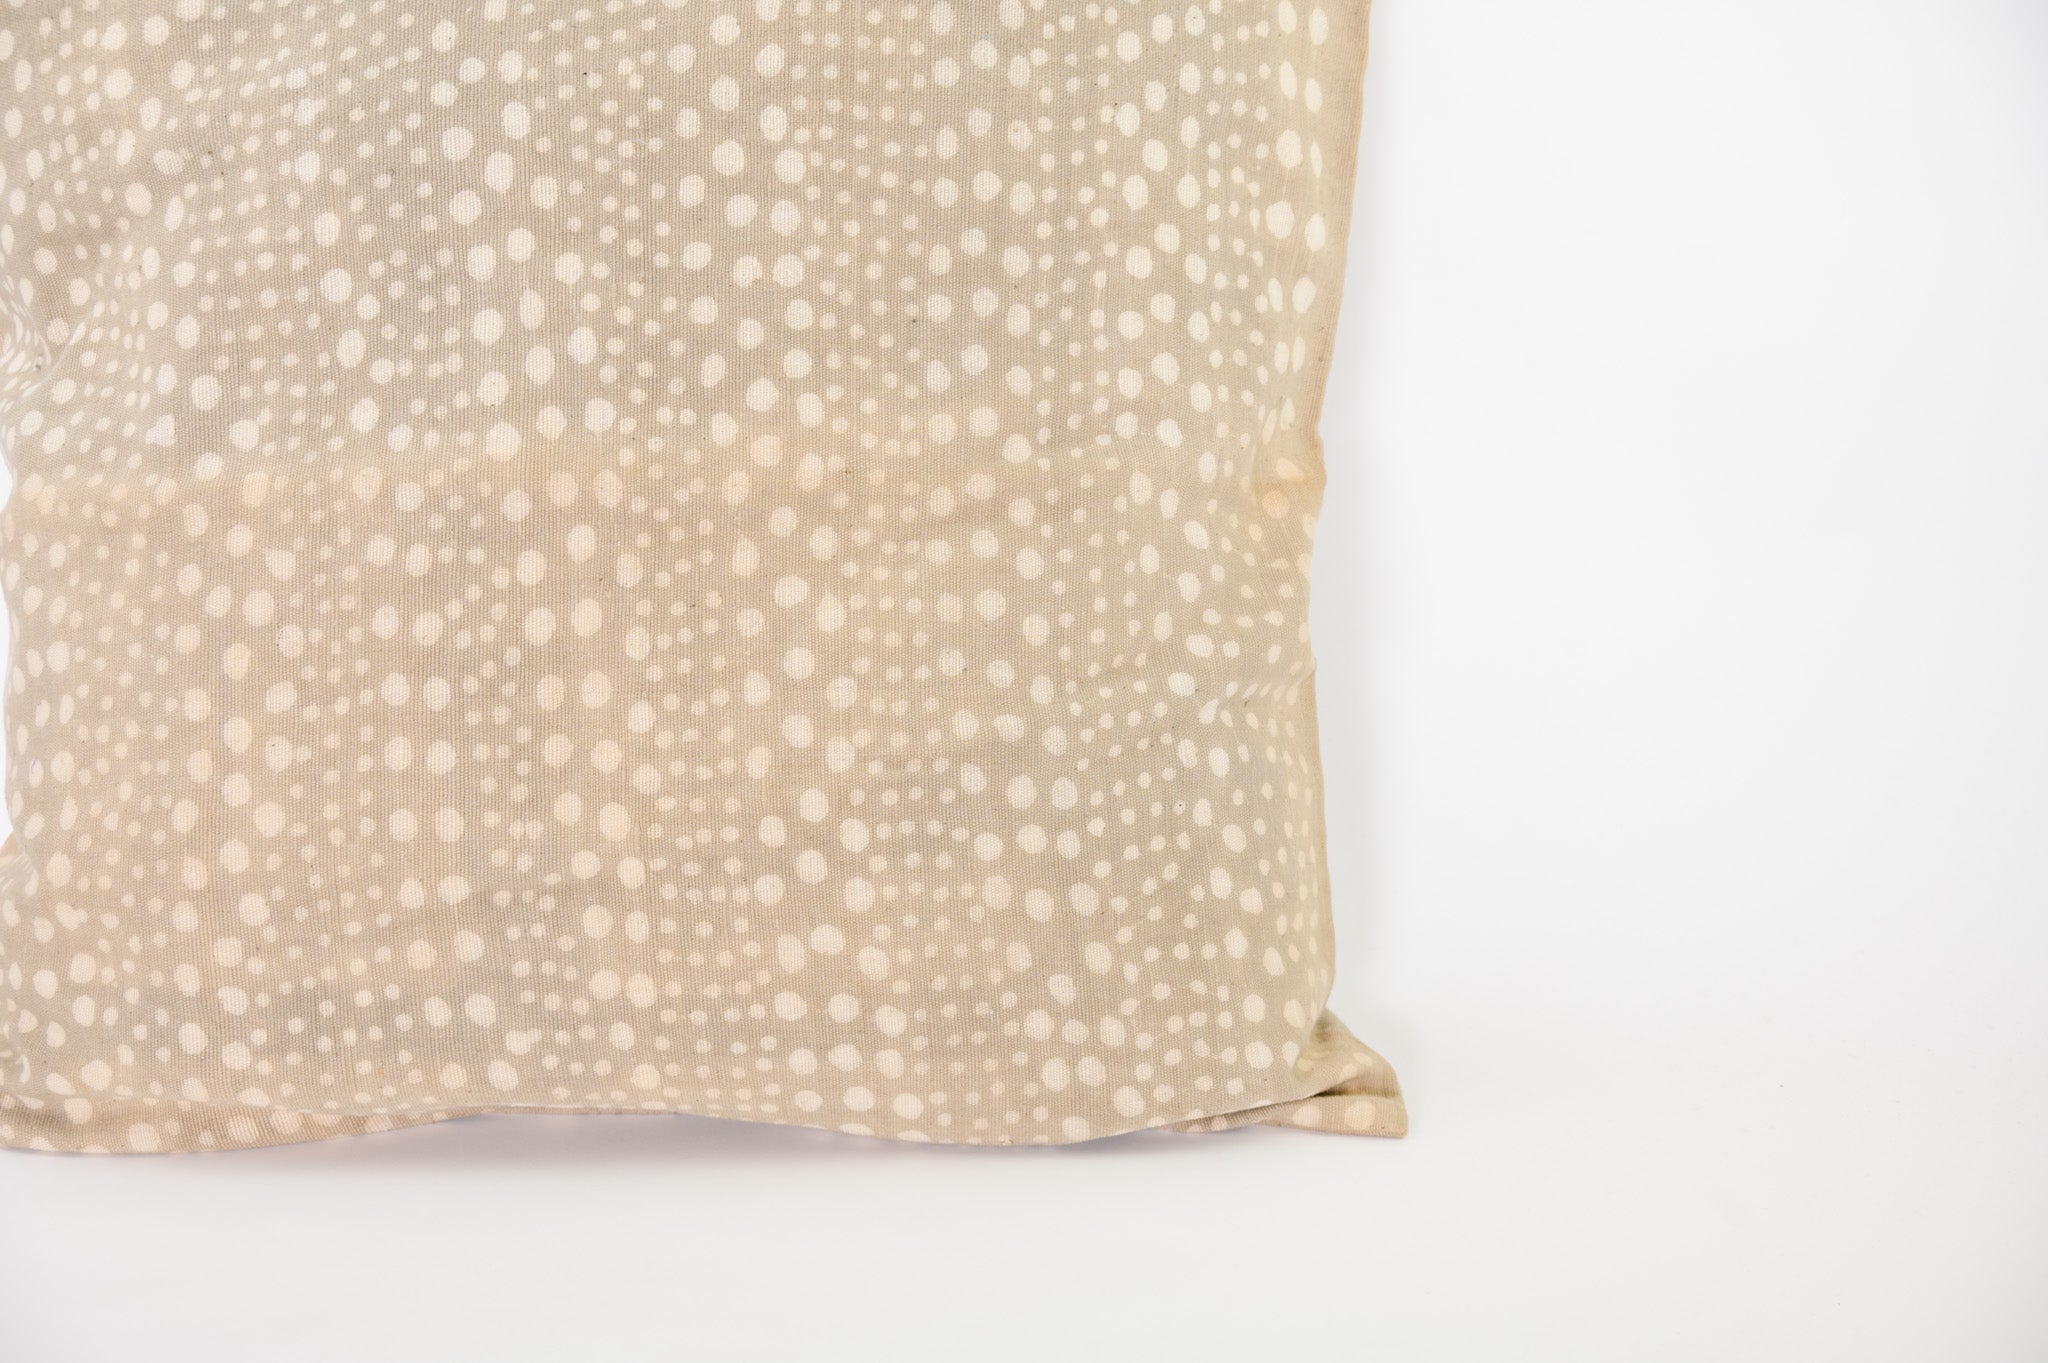 DOTS MUDCLOTH pillow cover GRAY 24"